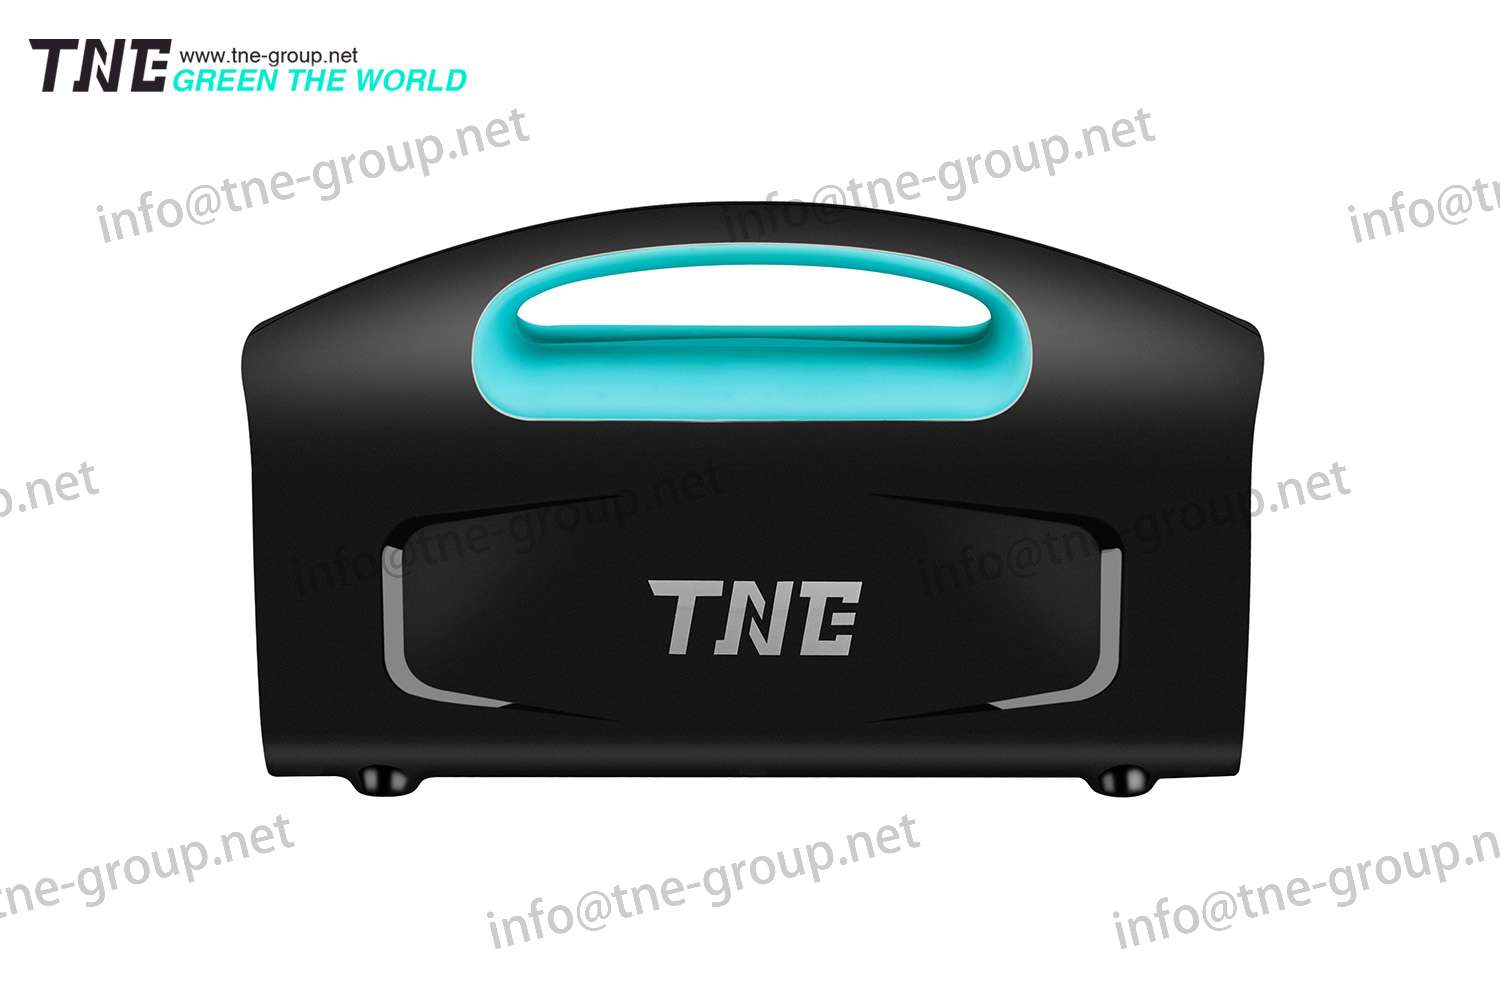 TNE Mini Solar Online Generator Power Bank UPS System with Solar Panel Charger